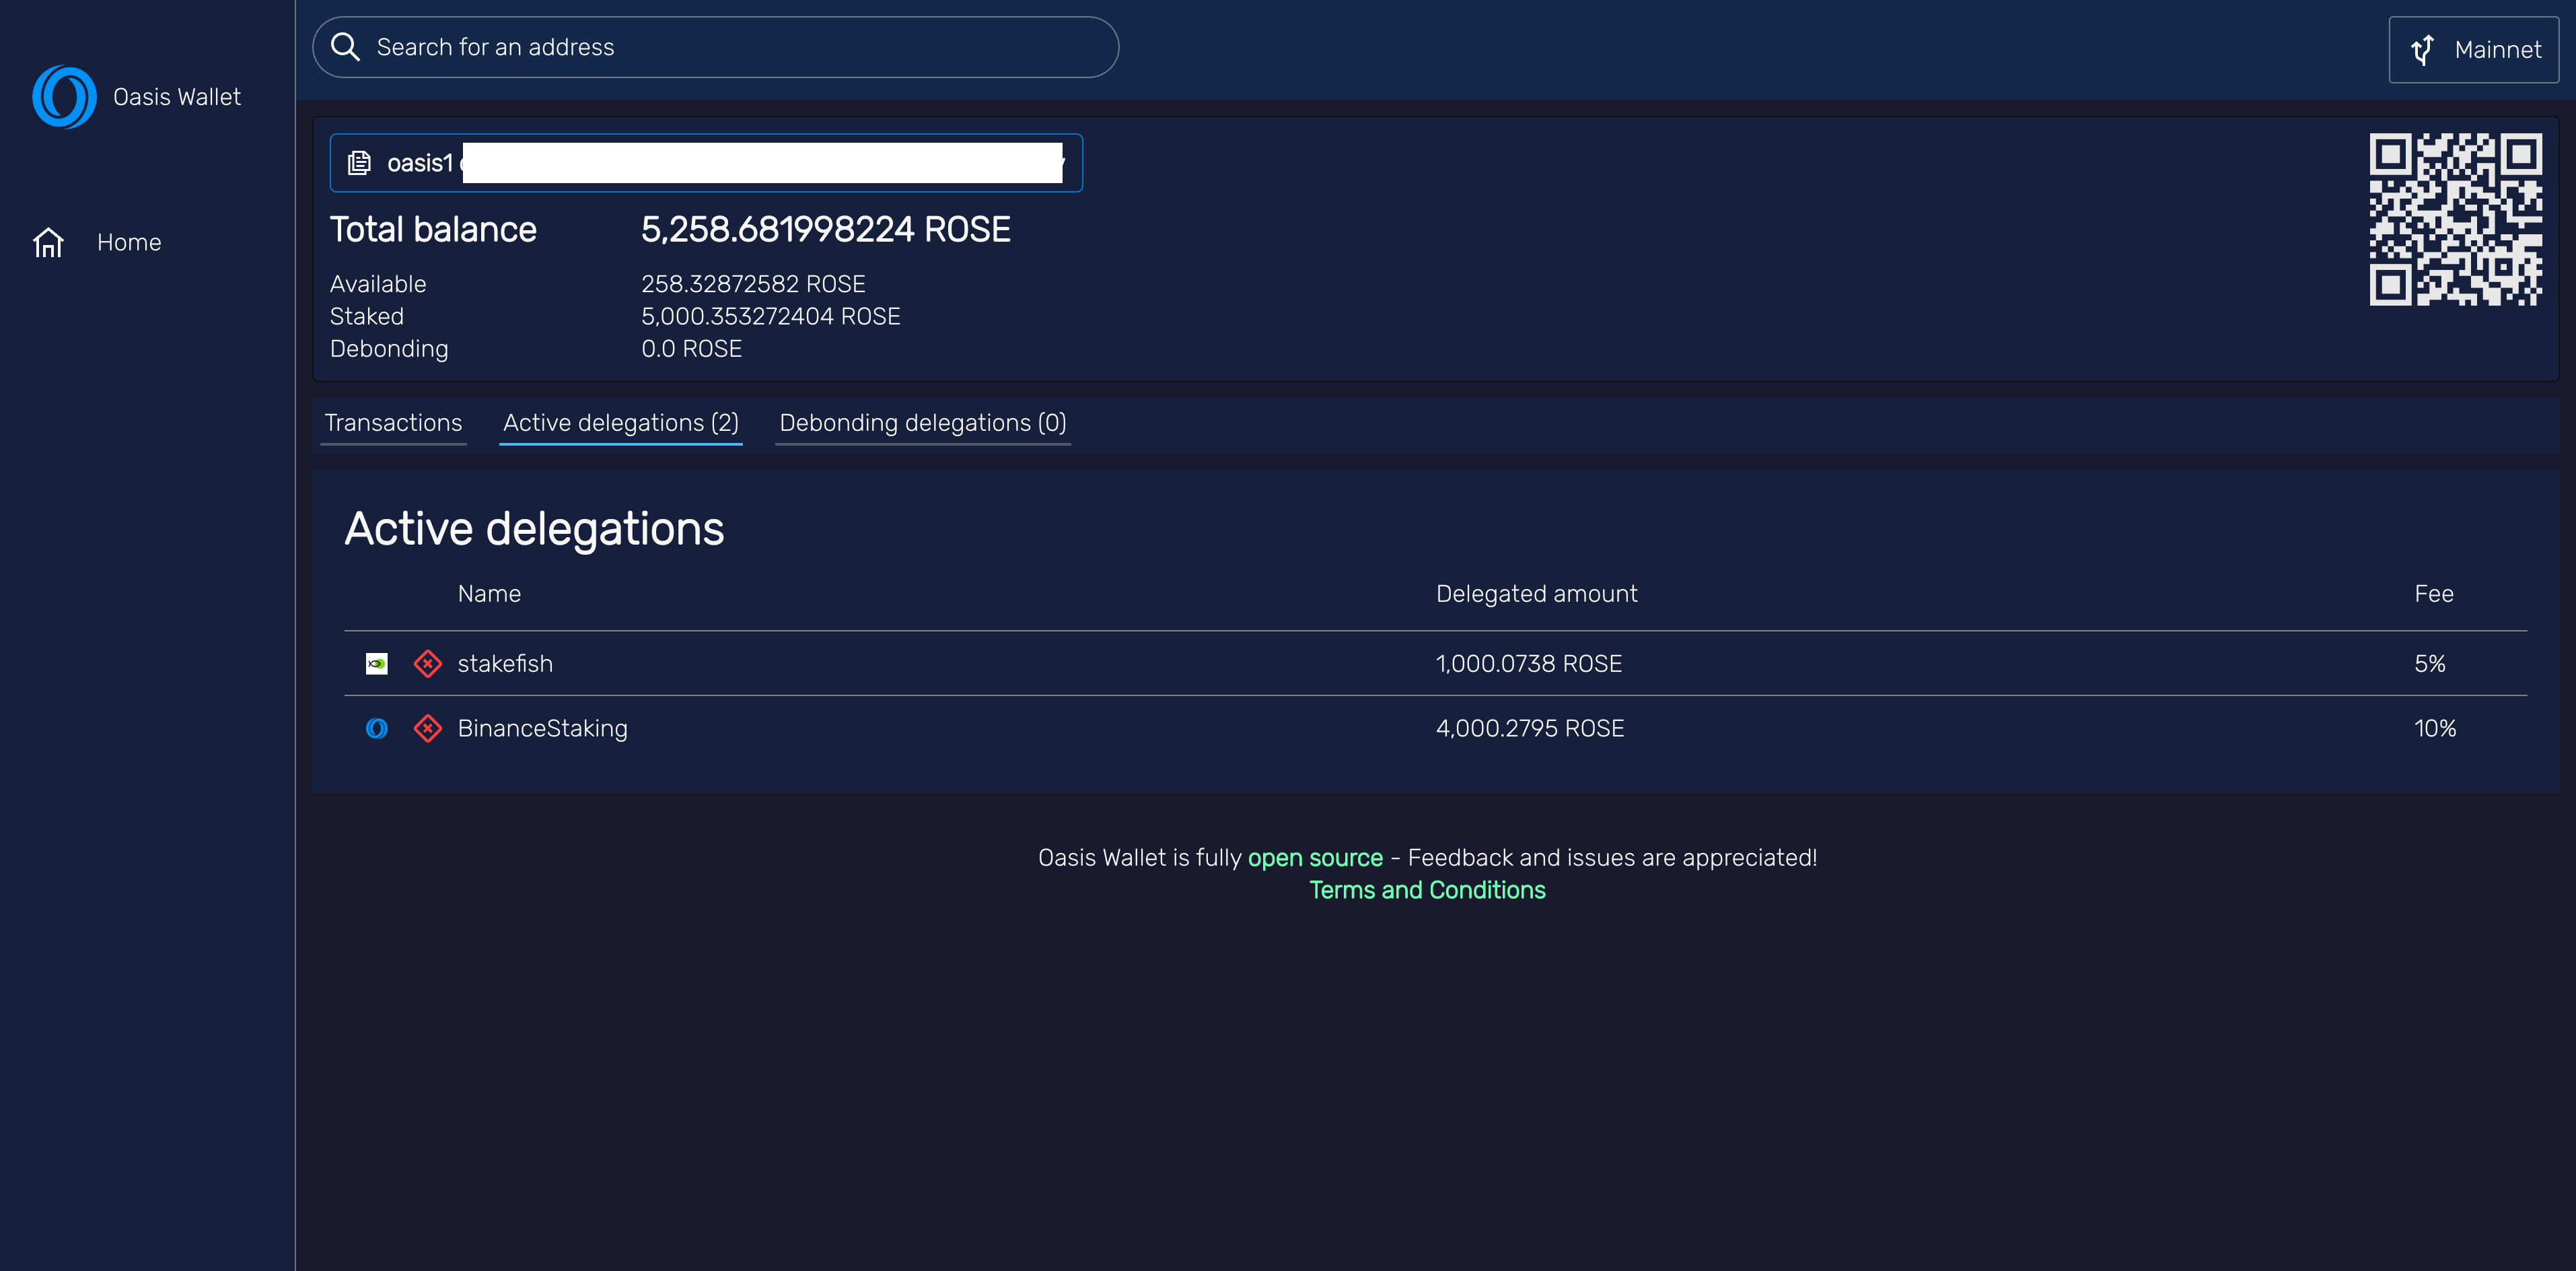 Account details of searched oasis1 address in Official Web Wallet